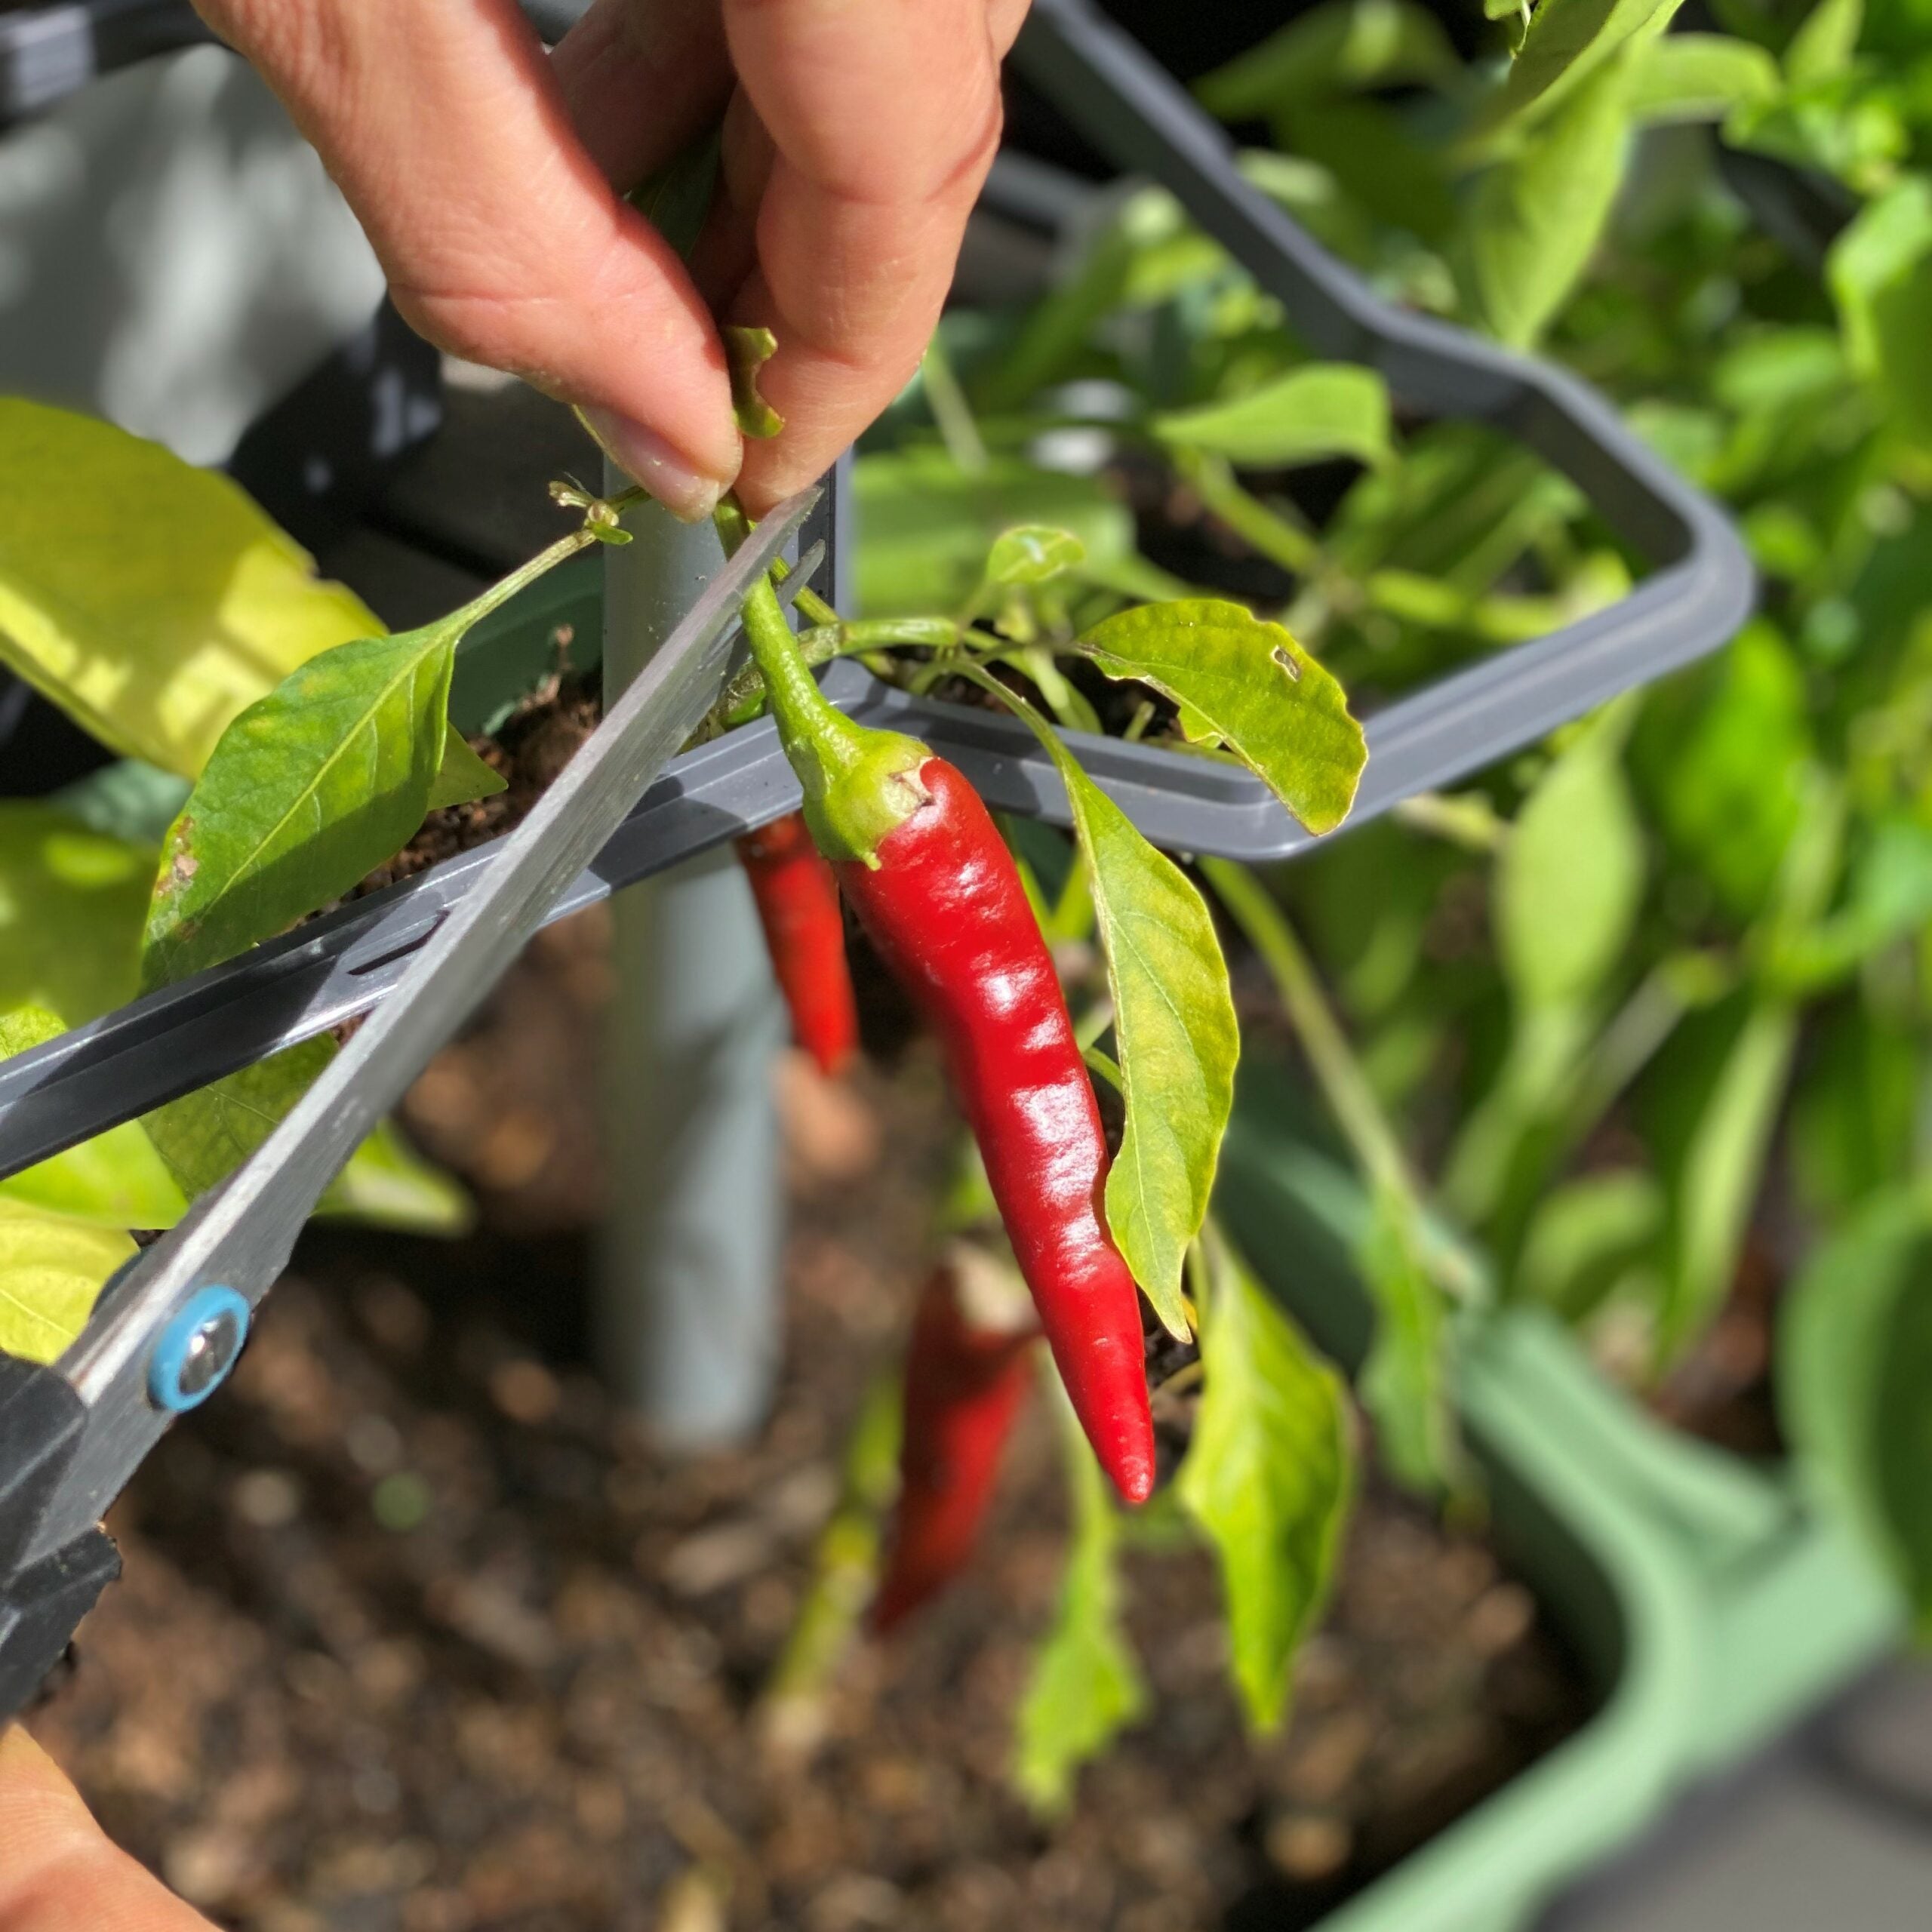 Harvesting and storing chilis correctly: it's all about timing